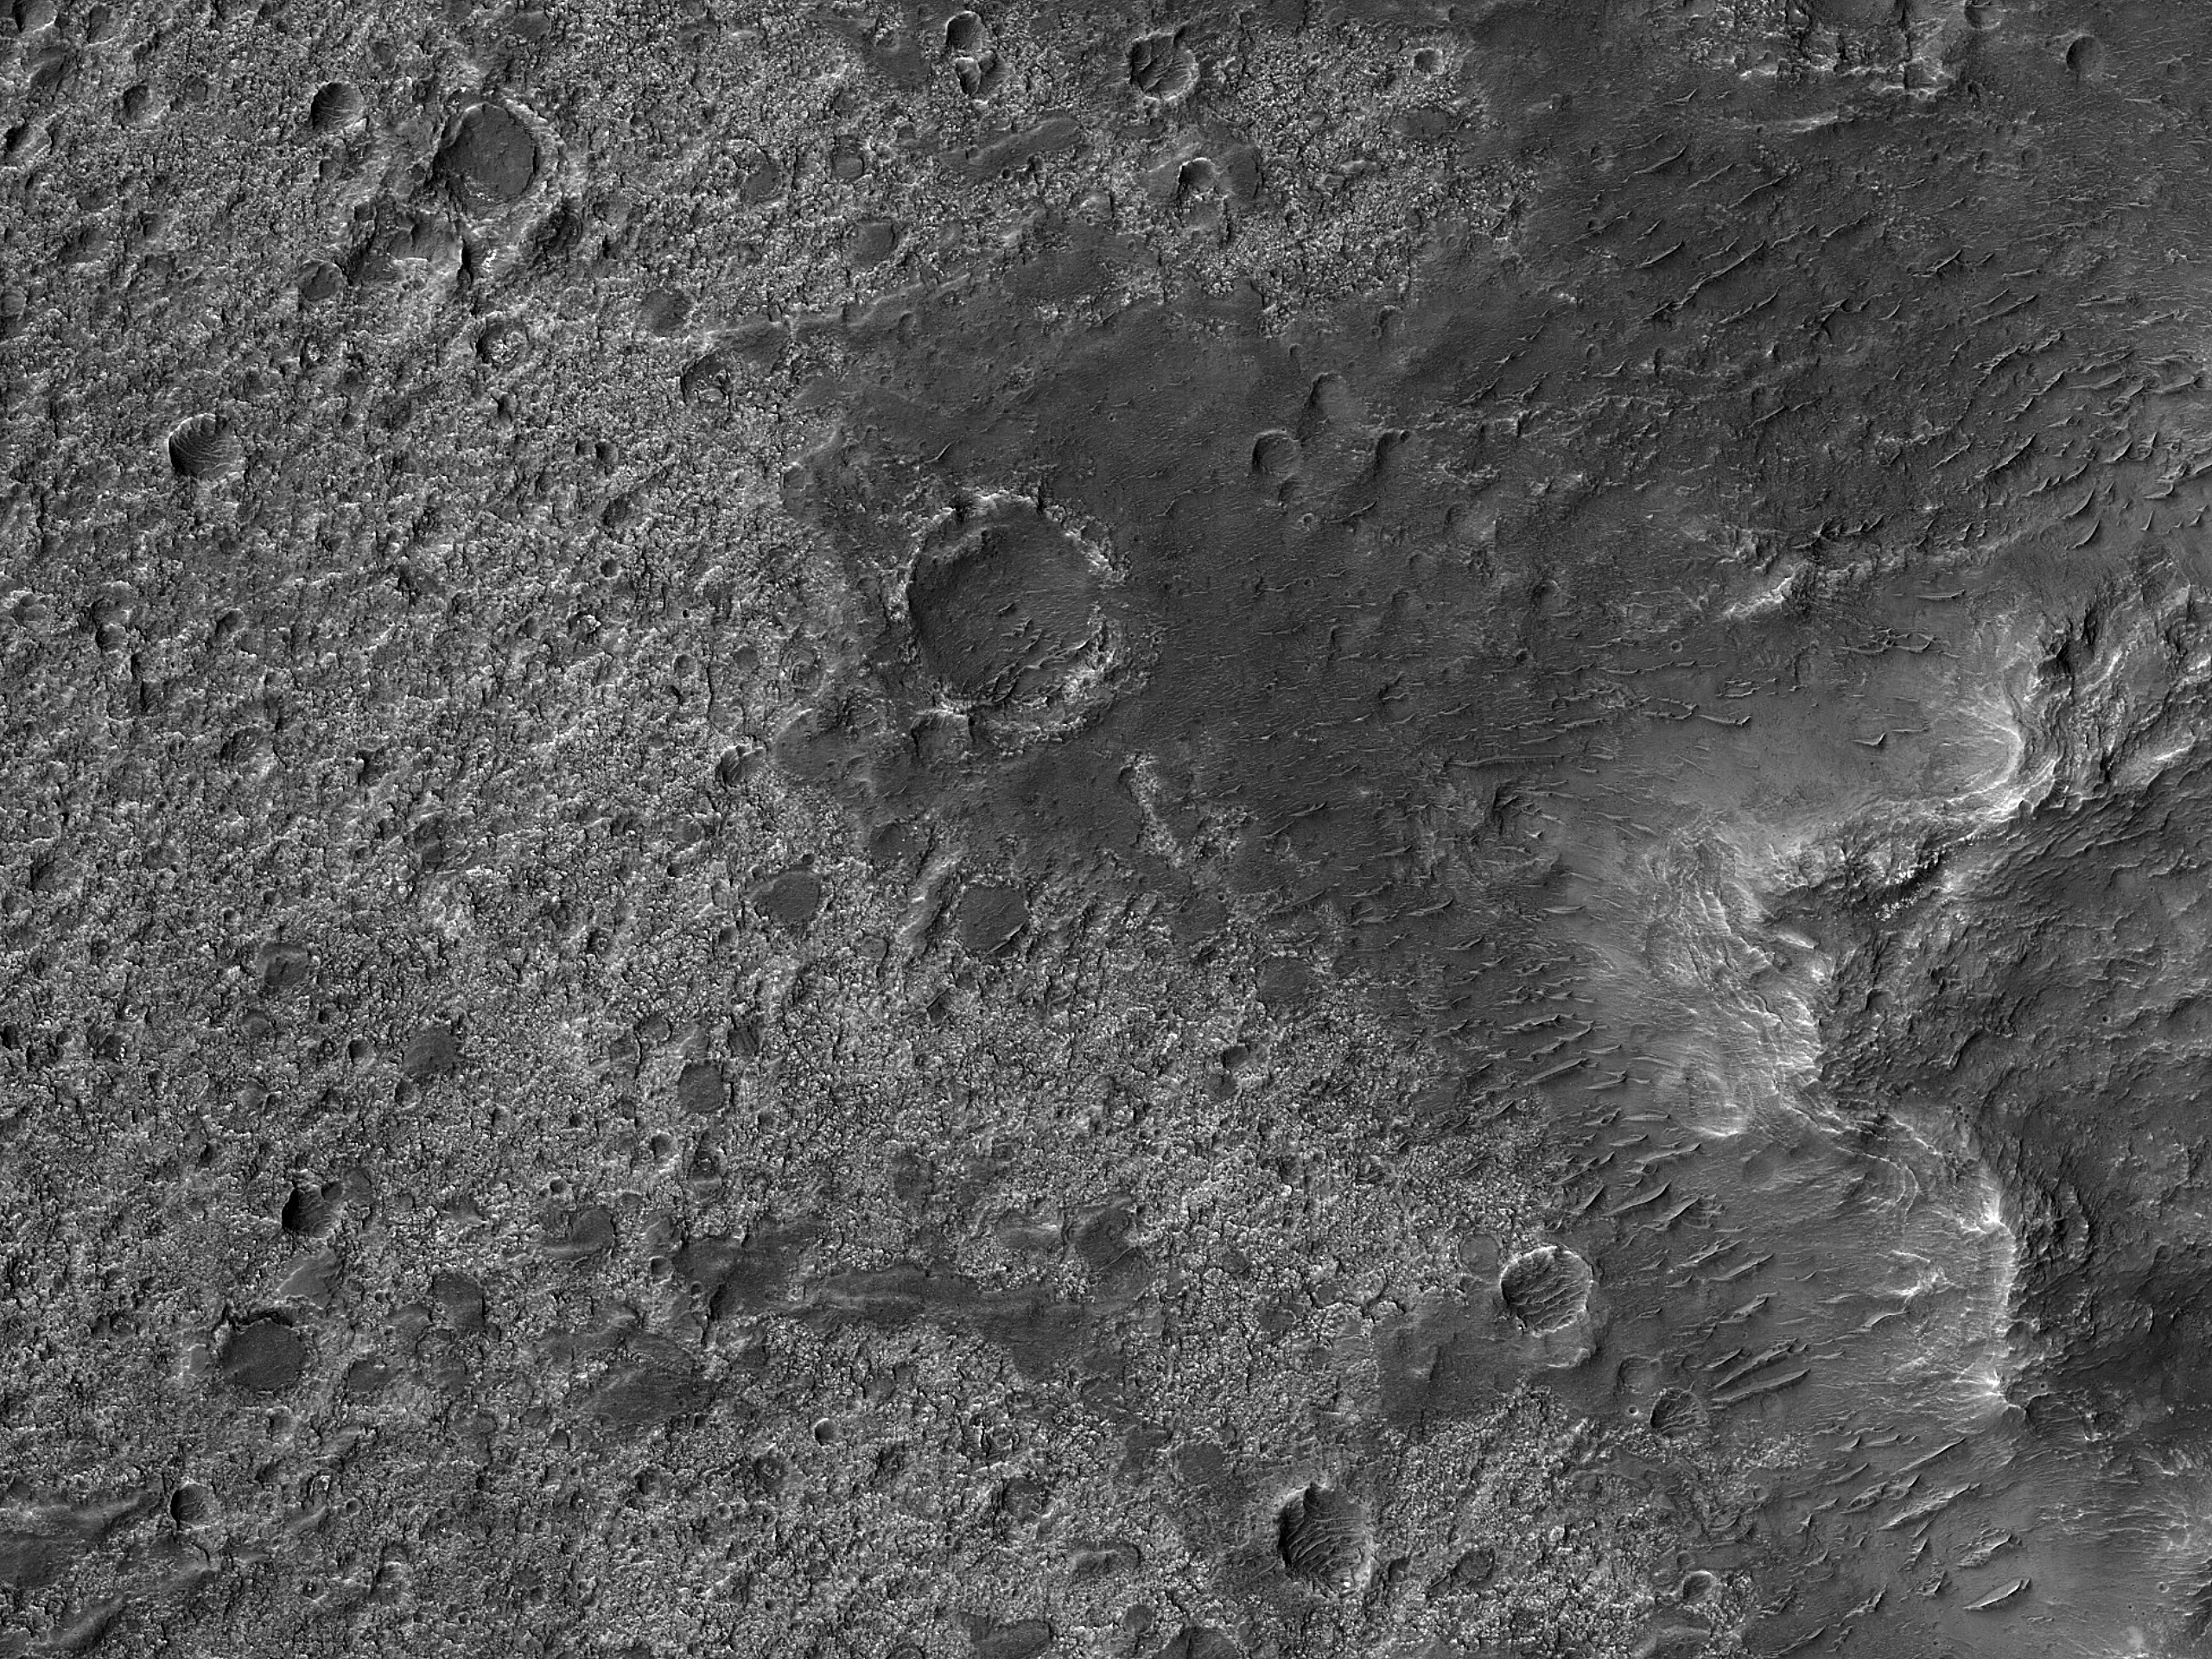 At the Edge of an Ejecta Blanket